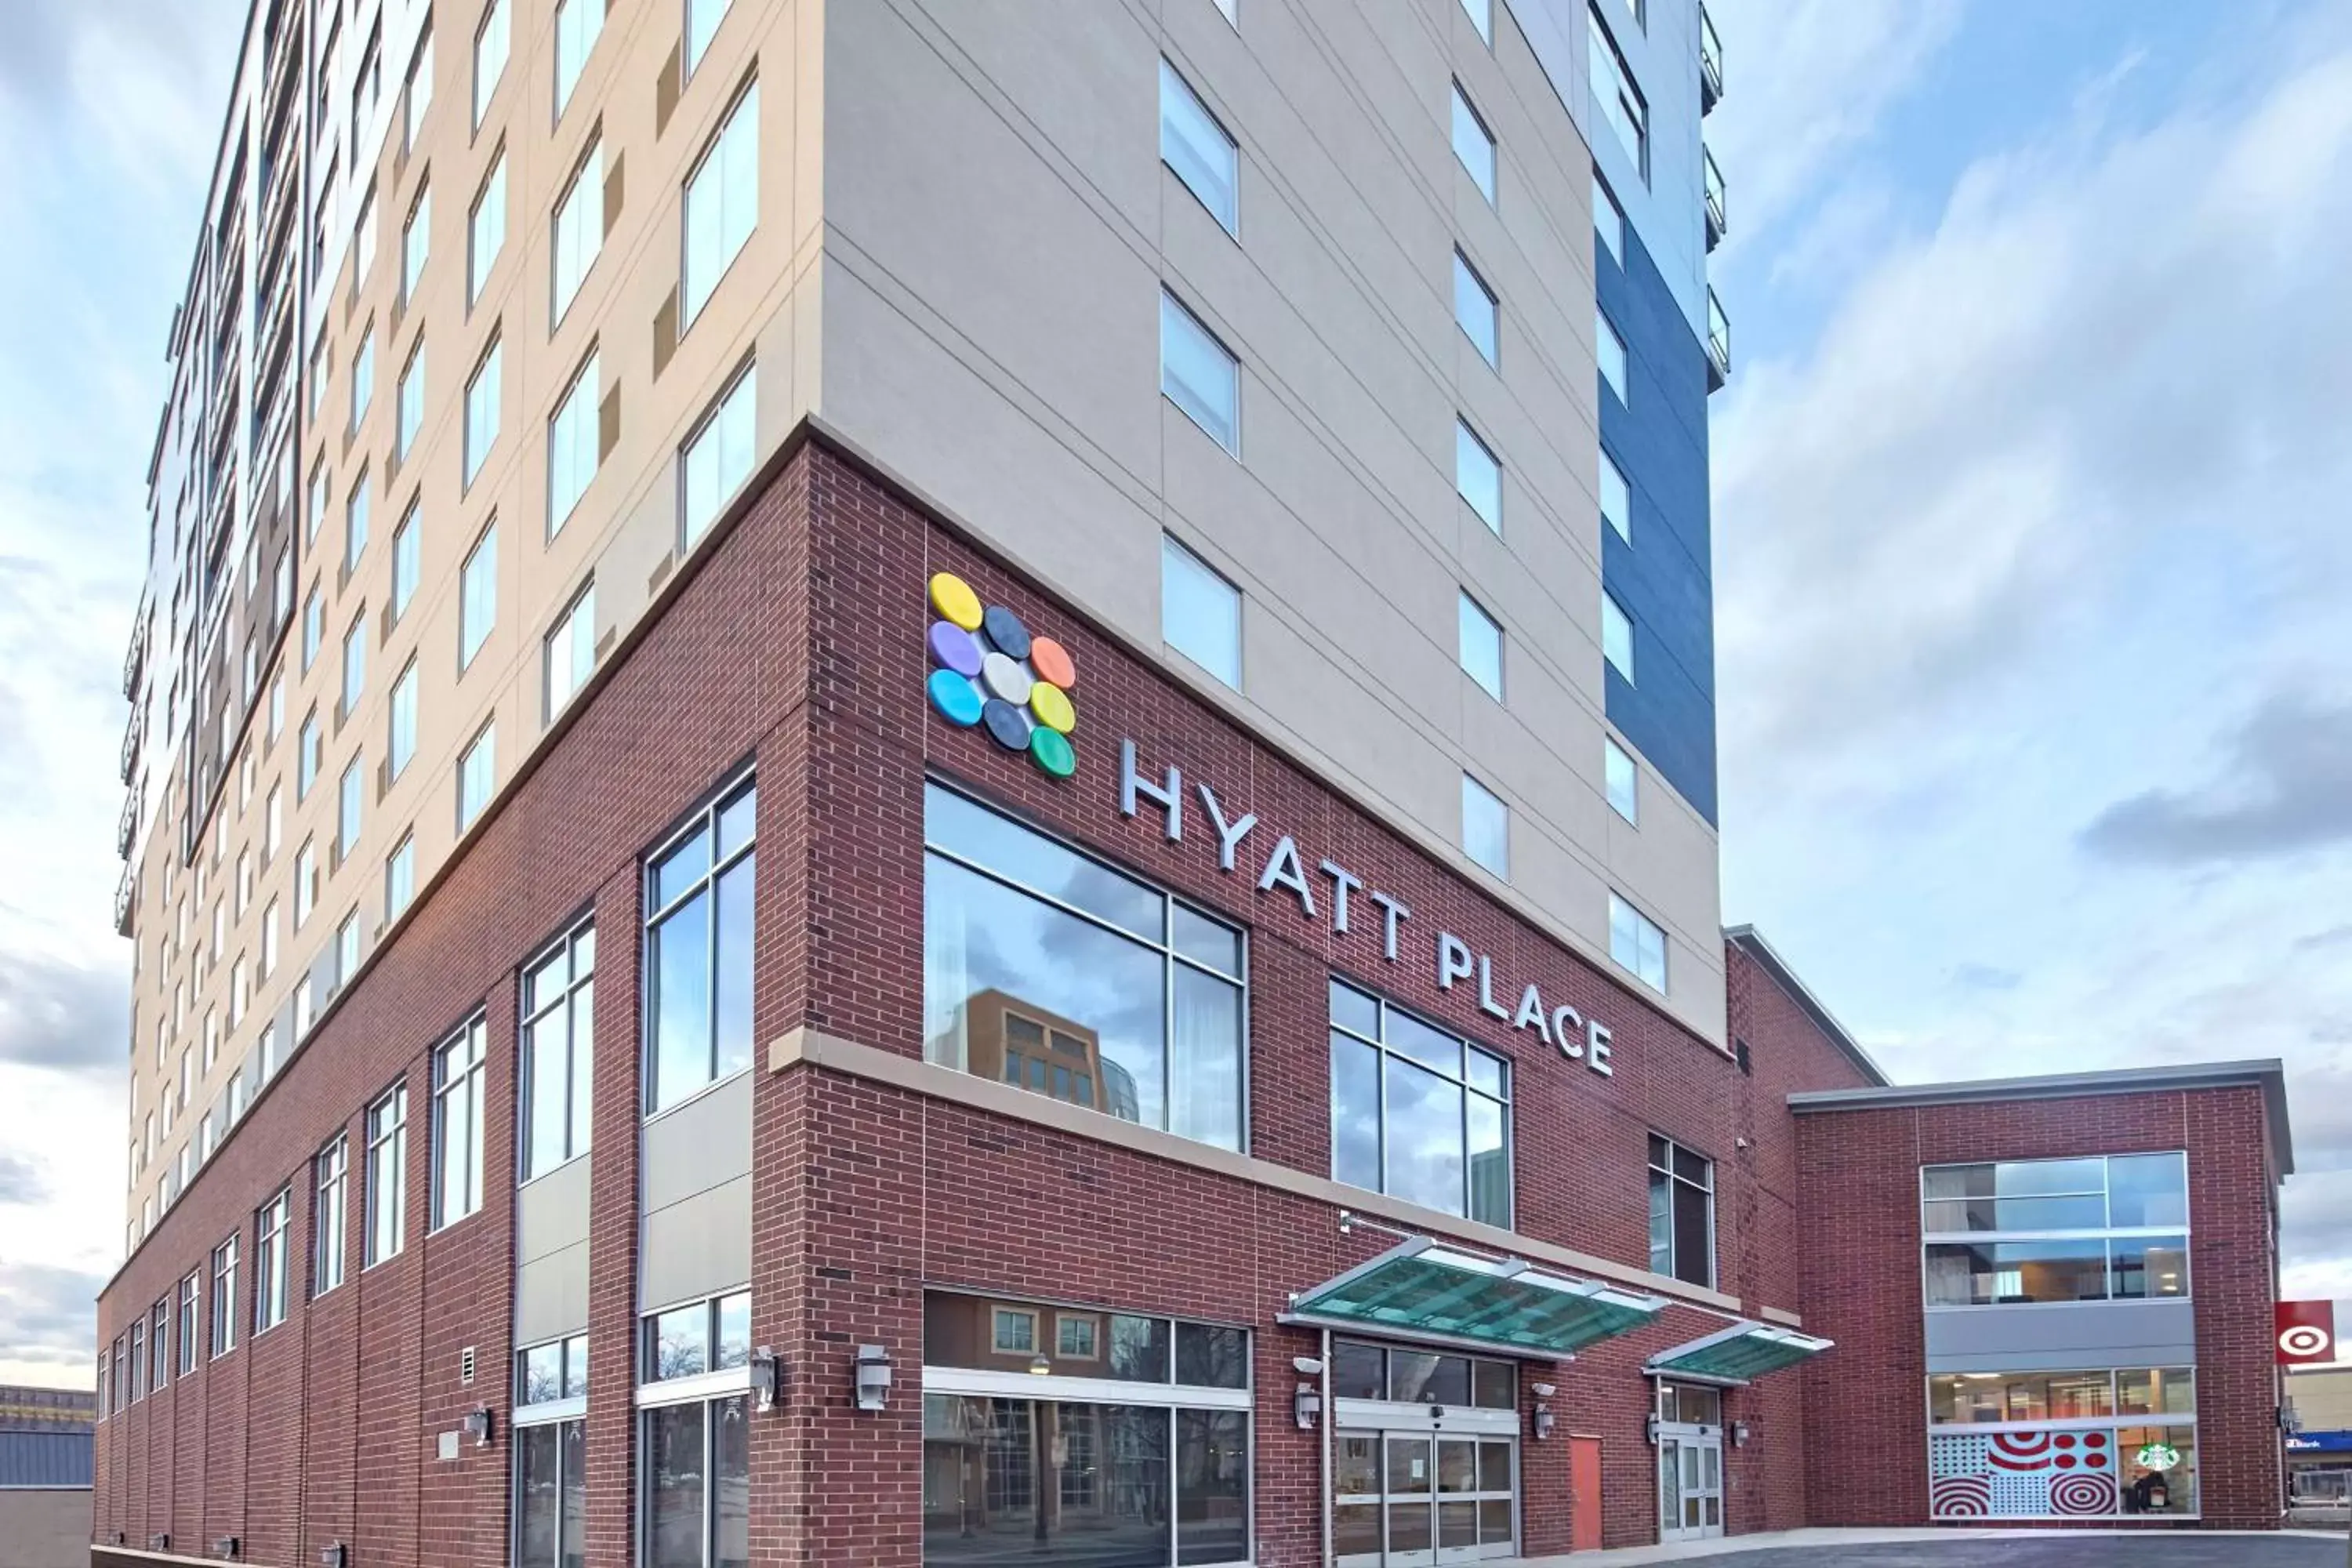 Property building in Hyatt Place State College